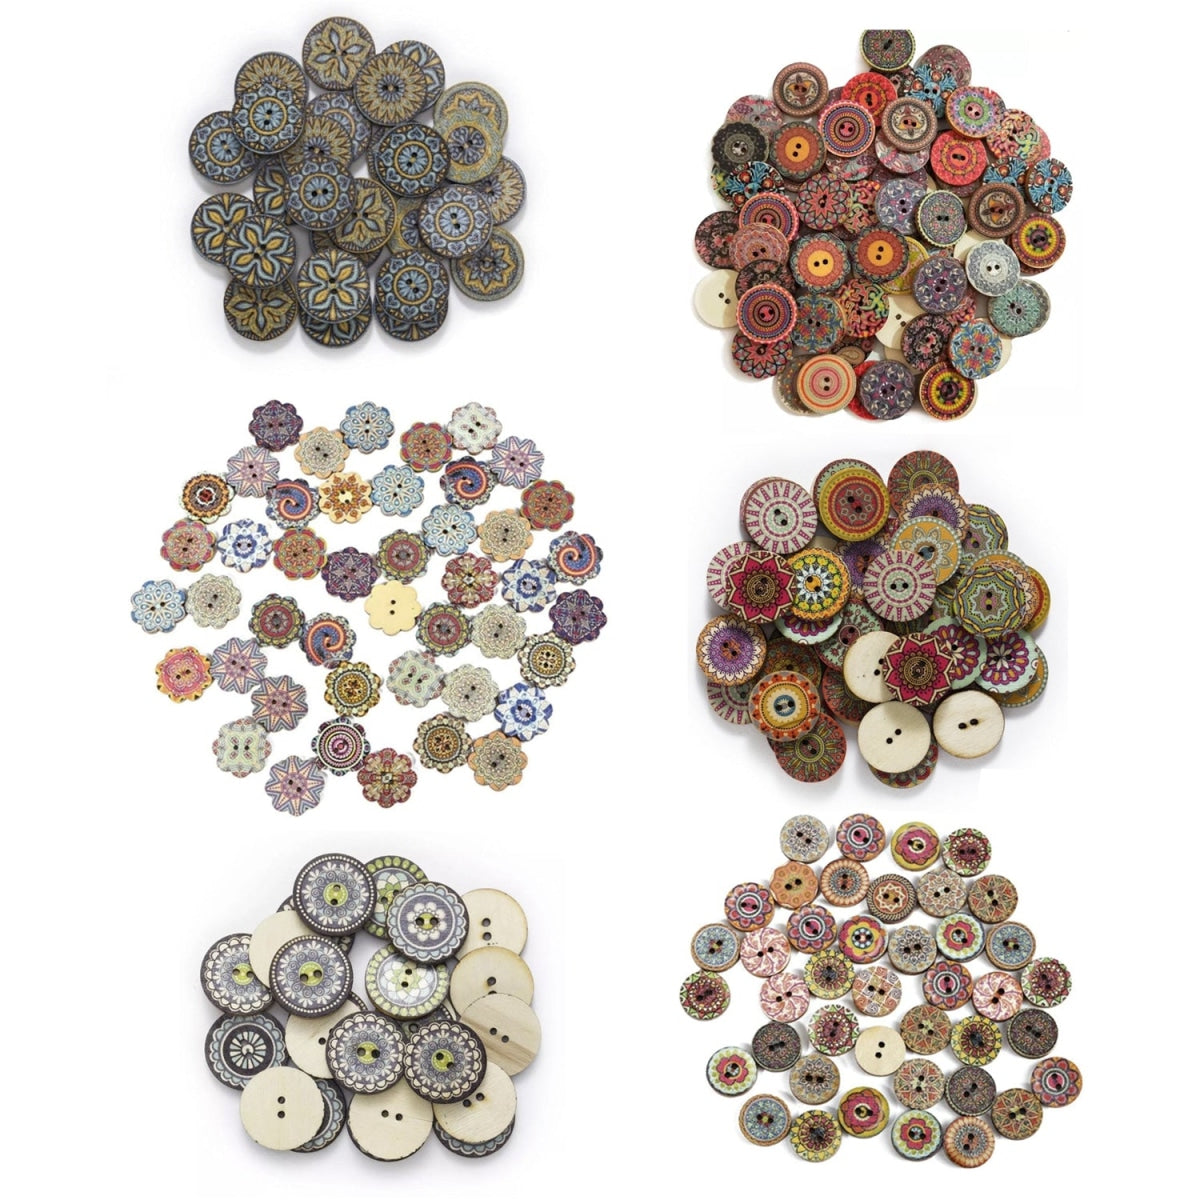 50Pcs Retro Wooden Buttons For Scrapbooking And Handmade Clothes 15-25Mm Set C Clothing